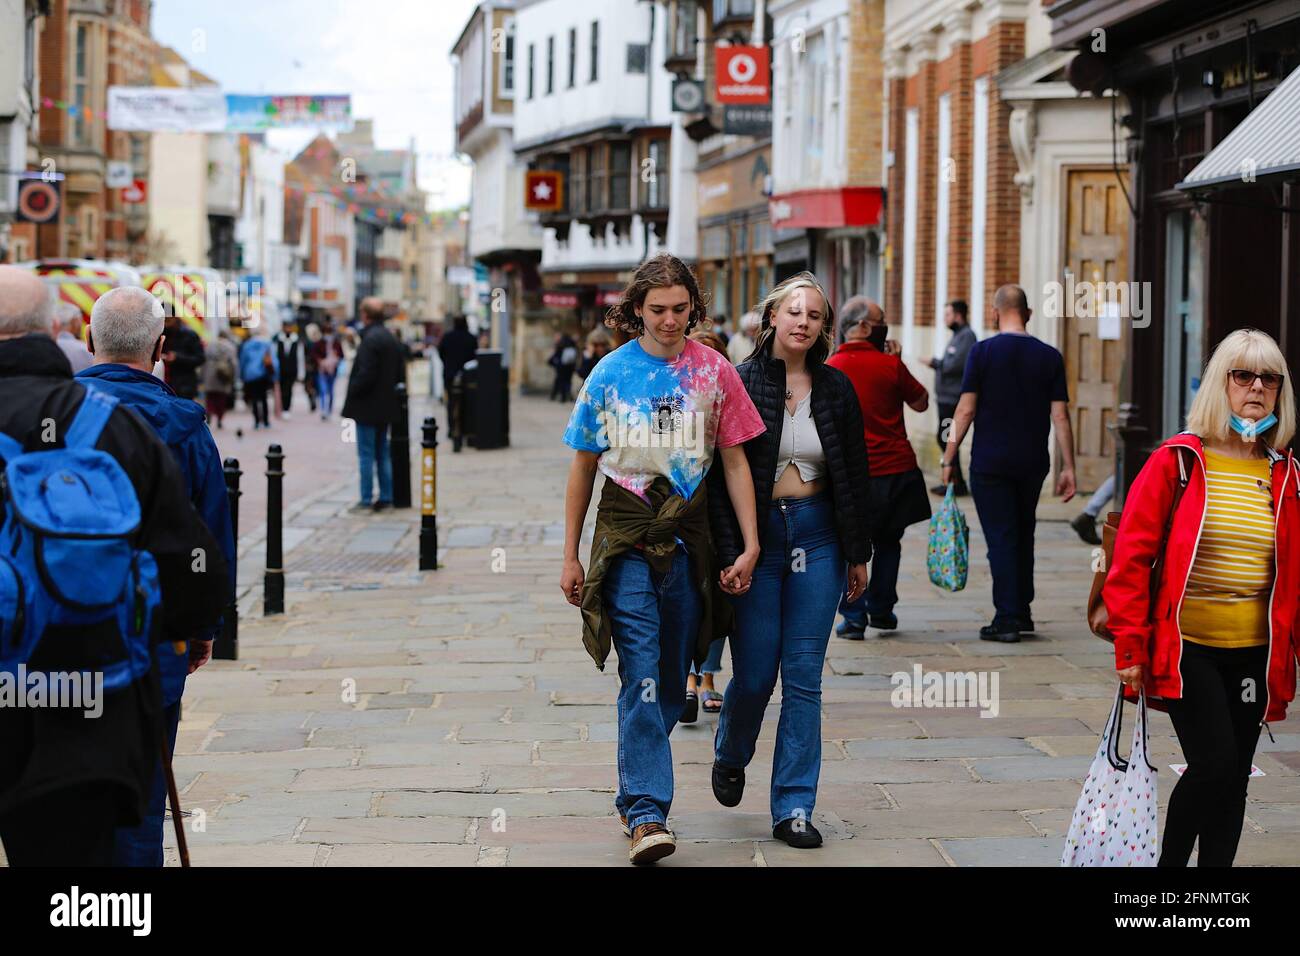 Canterbury, Kent, UK. 18 May, 2021. The Kent town of Canterbury has the highest cases of the Indian variant of COVID-19 in the South East, ranking 32nd in England. Busy high street as people get back to some resemblance of normality. Photo Credit: Paul Lawrenson /Alamy Live News Stock Photo